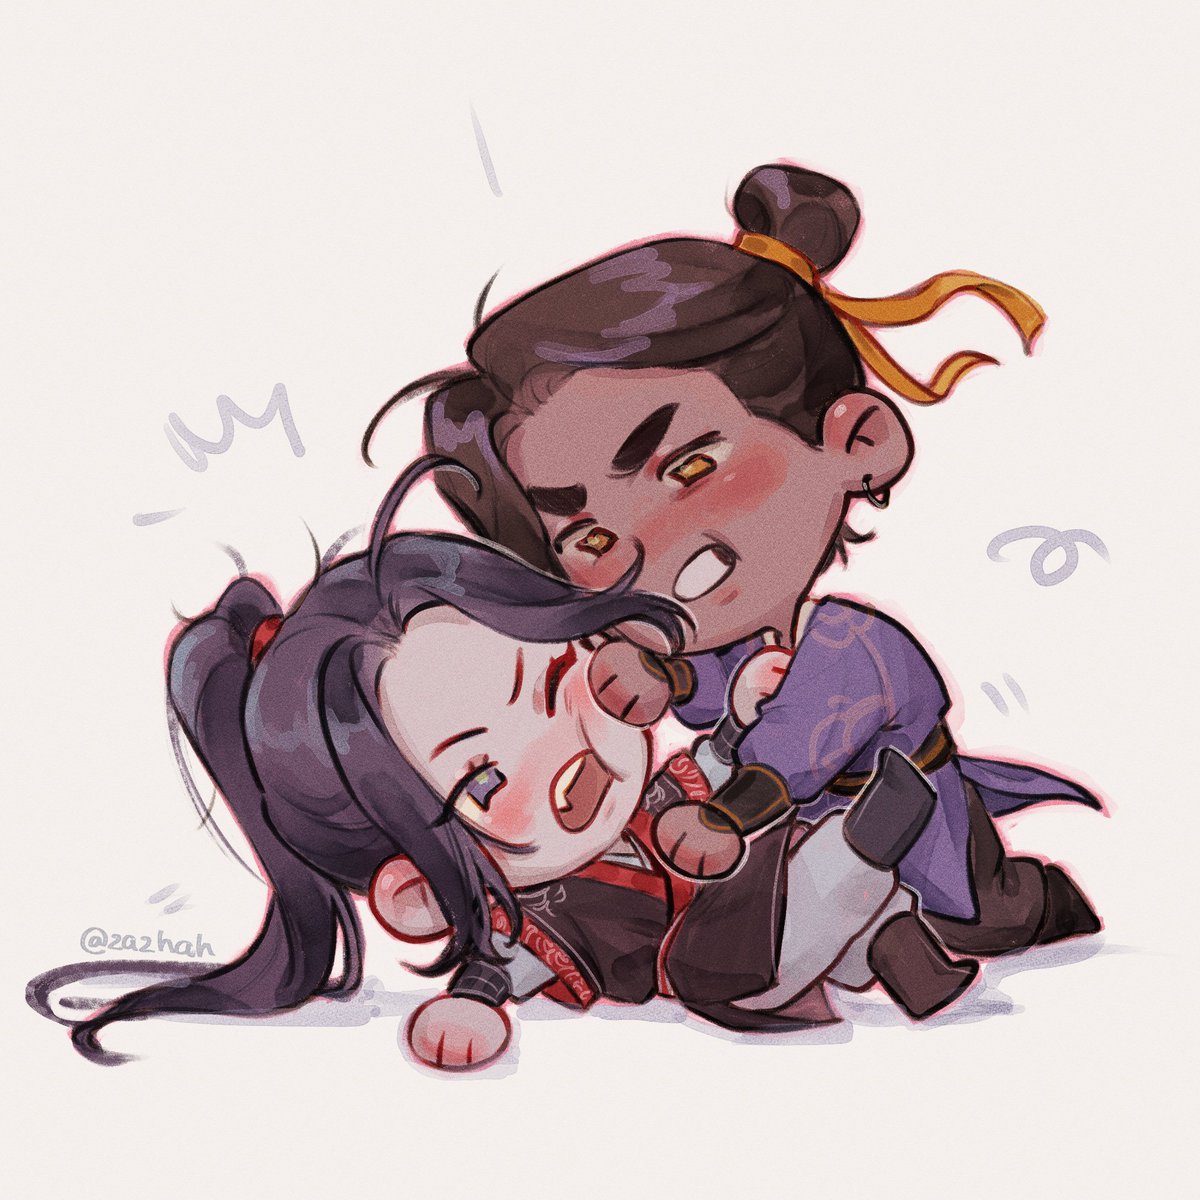 like cats and dogs #tgcf #fengqing